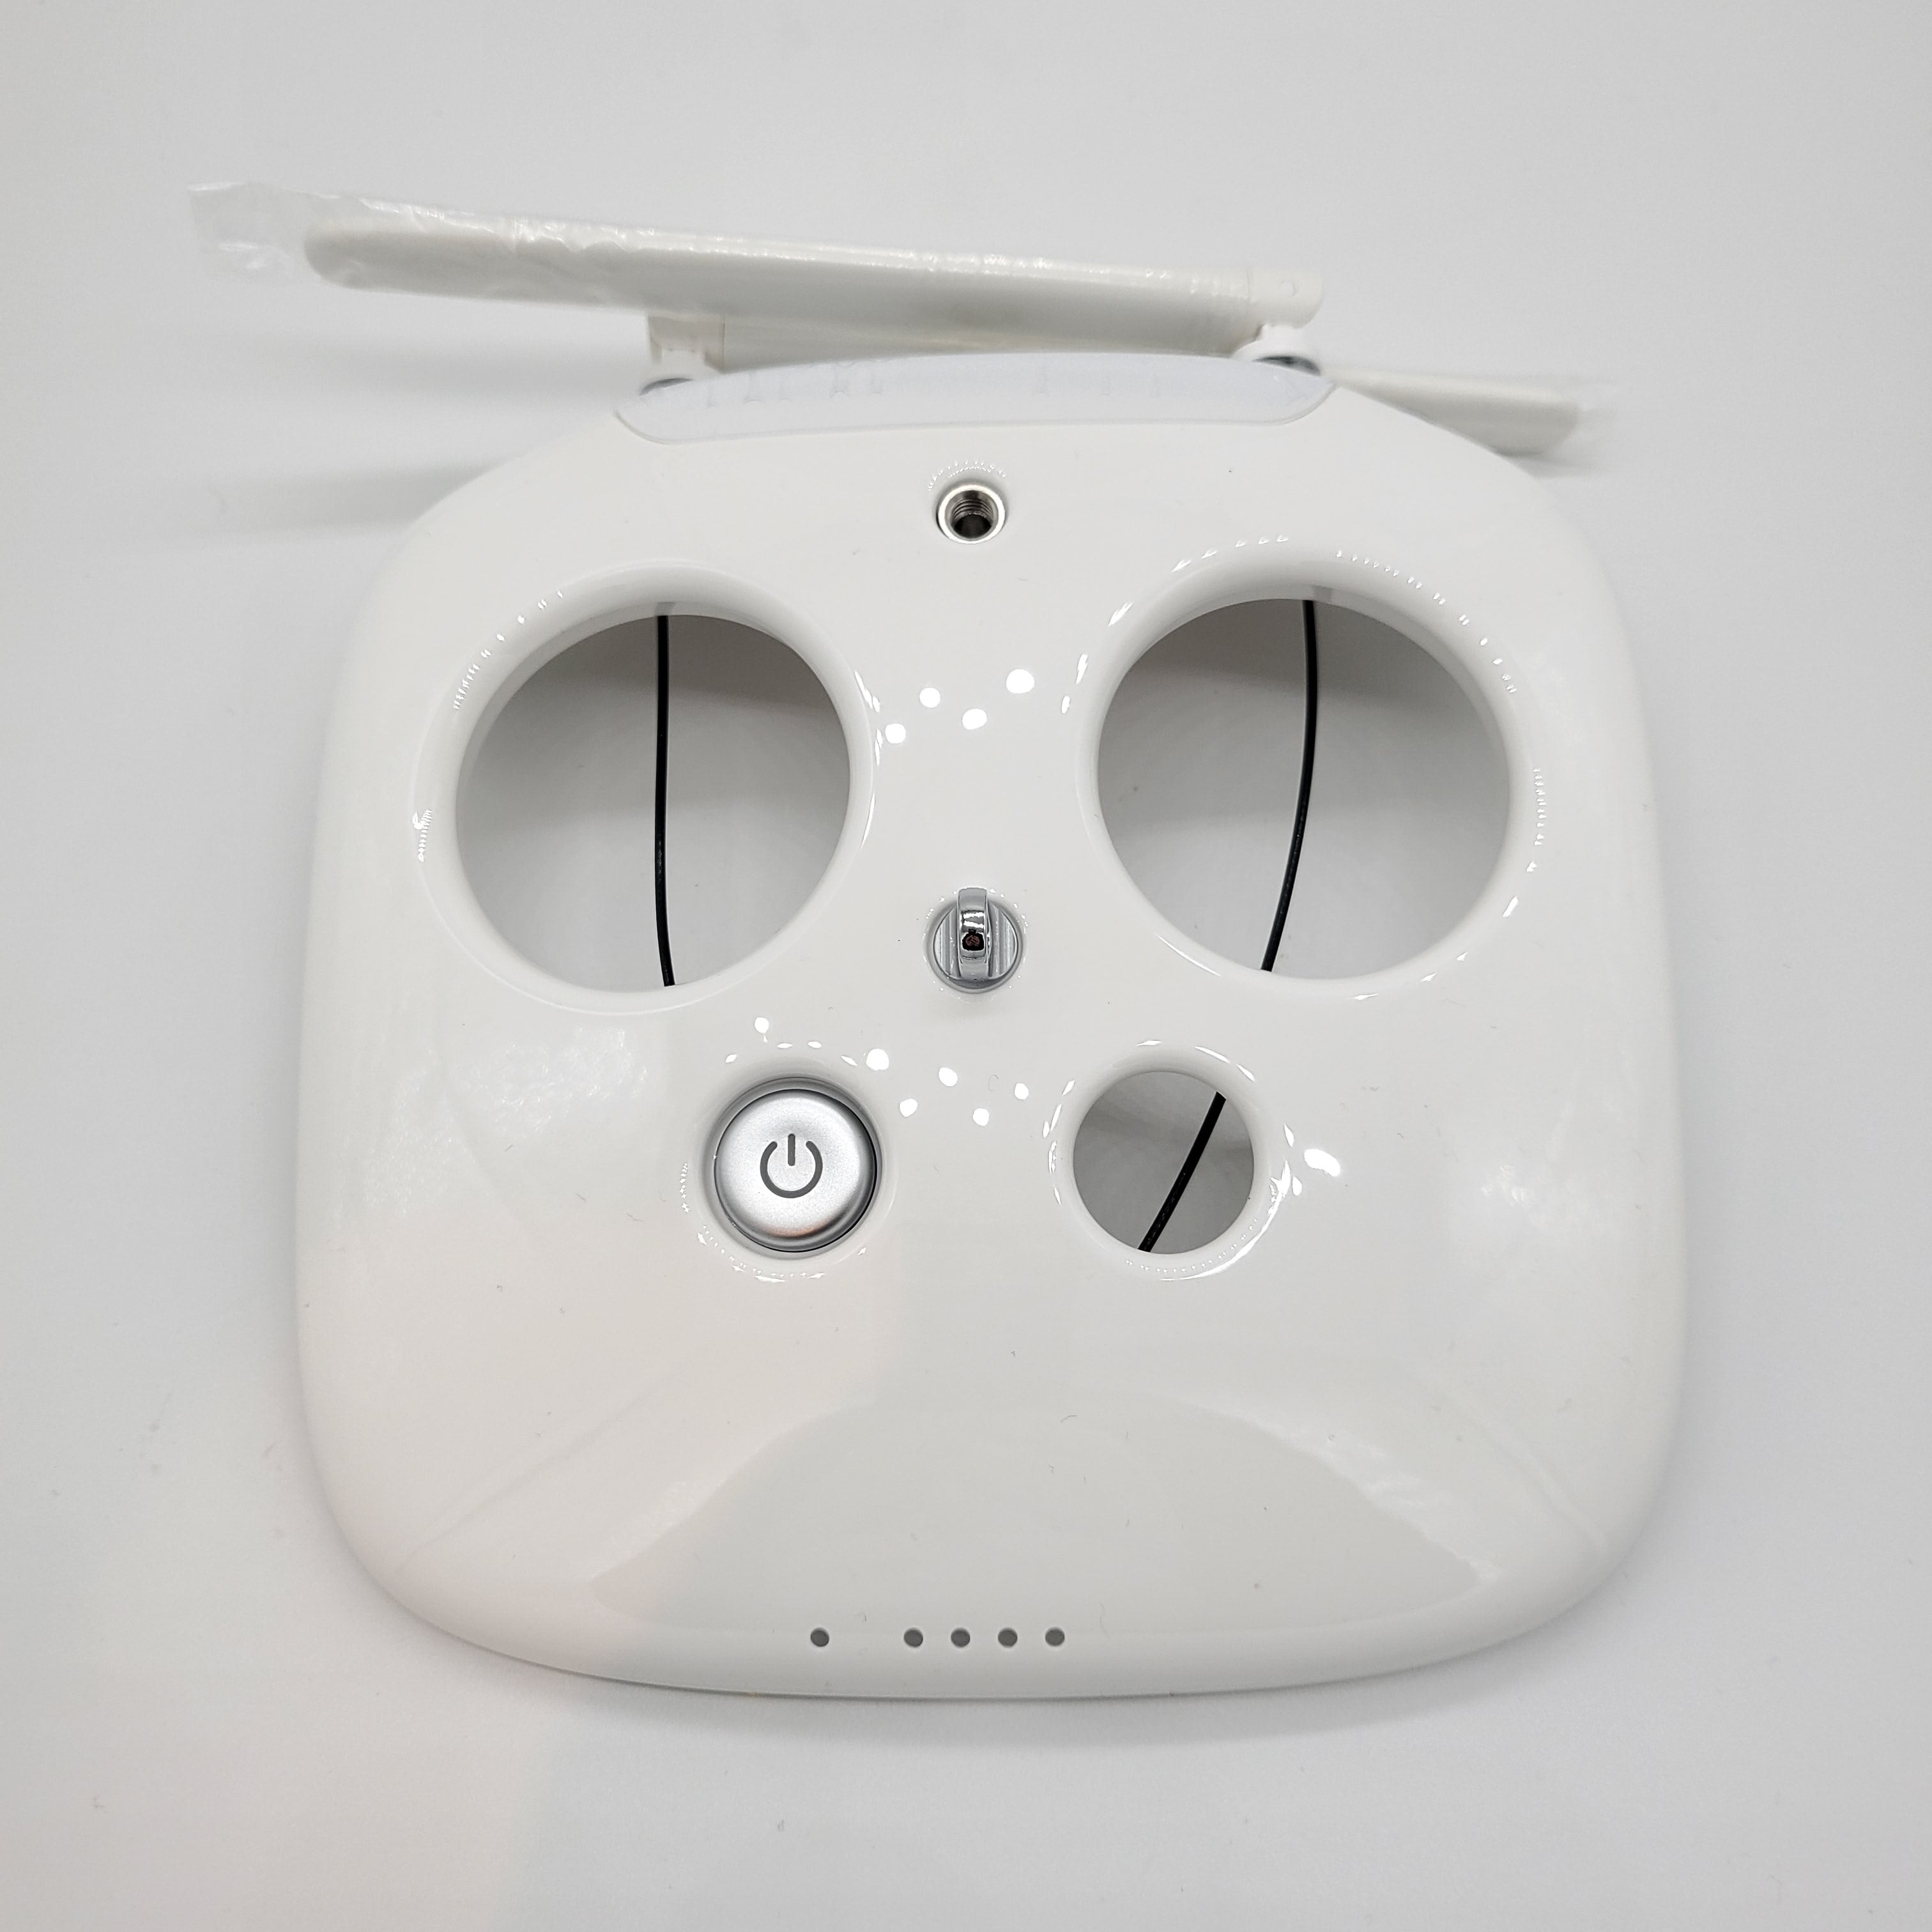 Phantom 4 Pro V2.0 GL300L Remote Controller (Without a Built-in Screen) Upper Shell Module